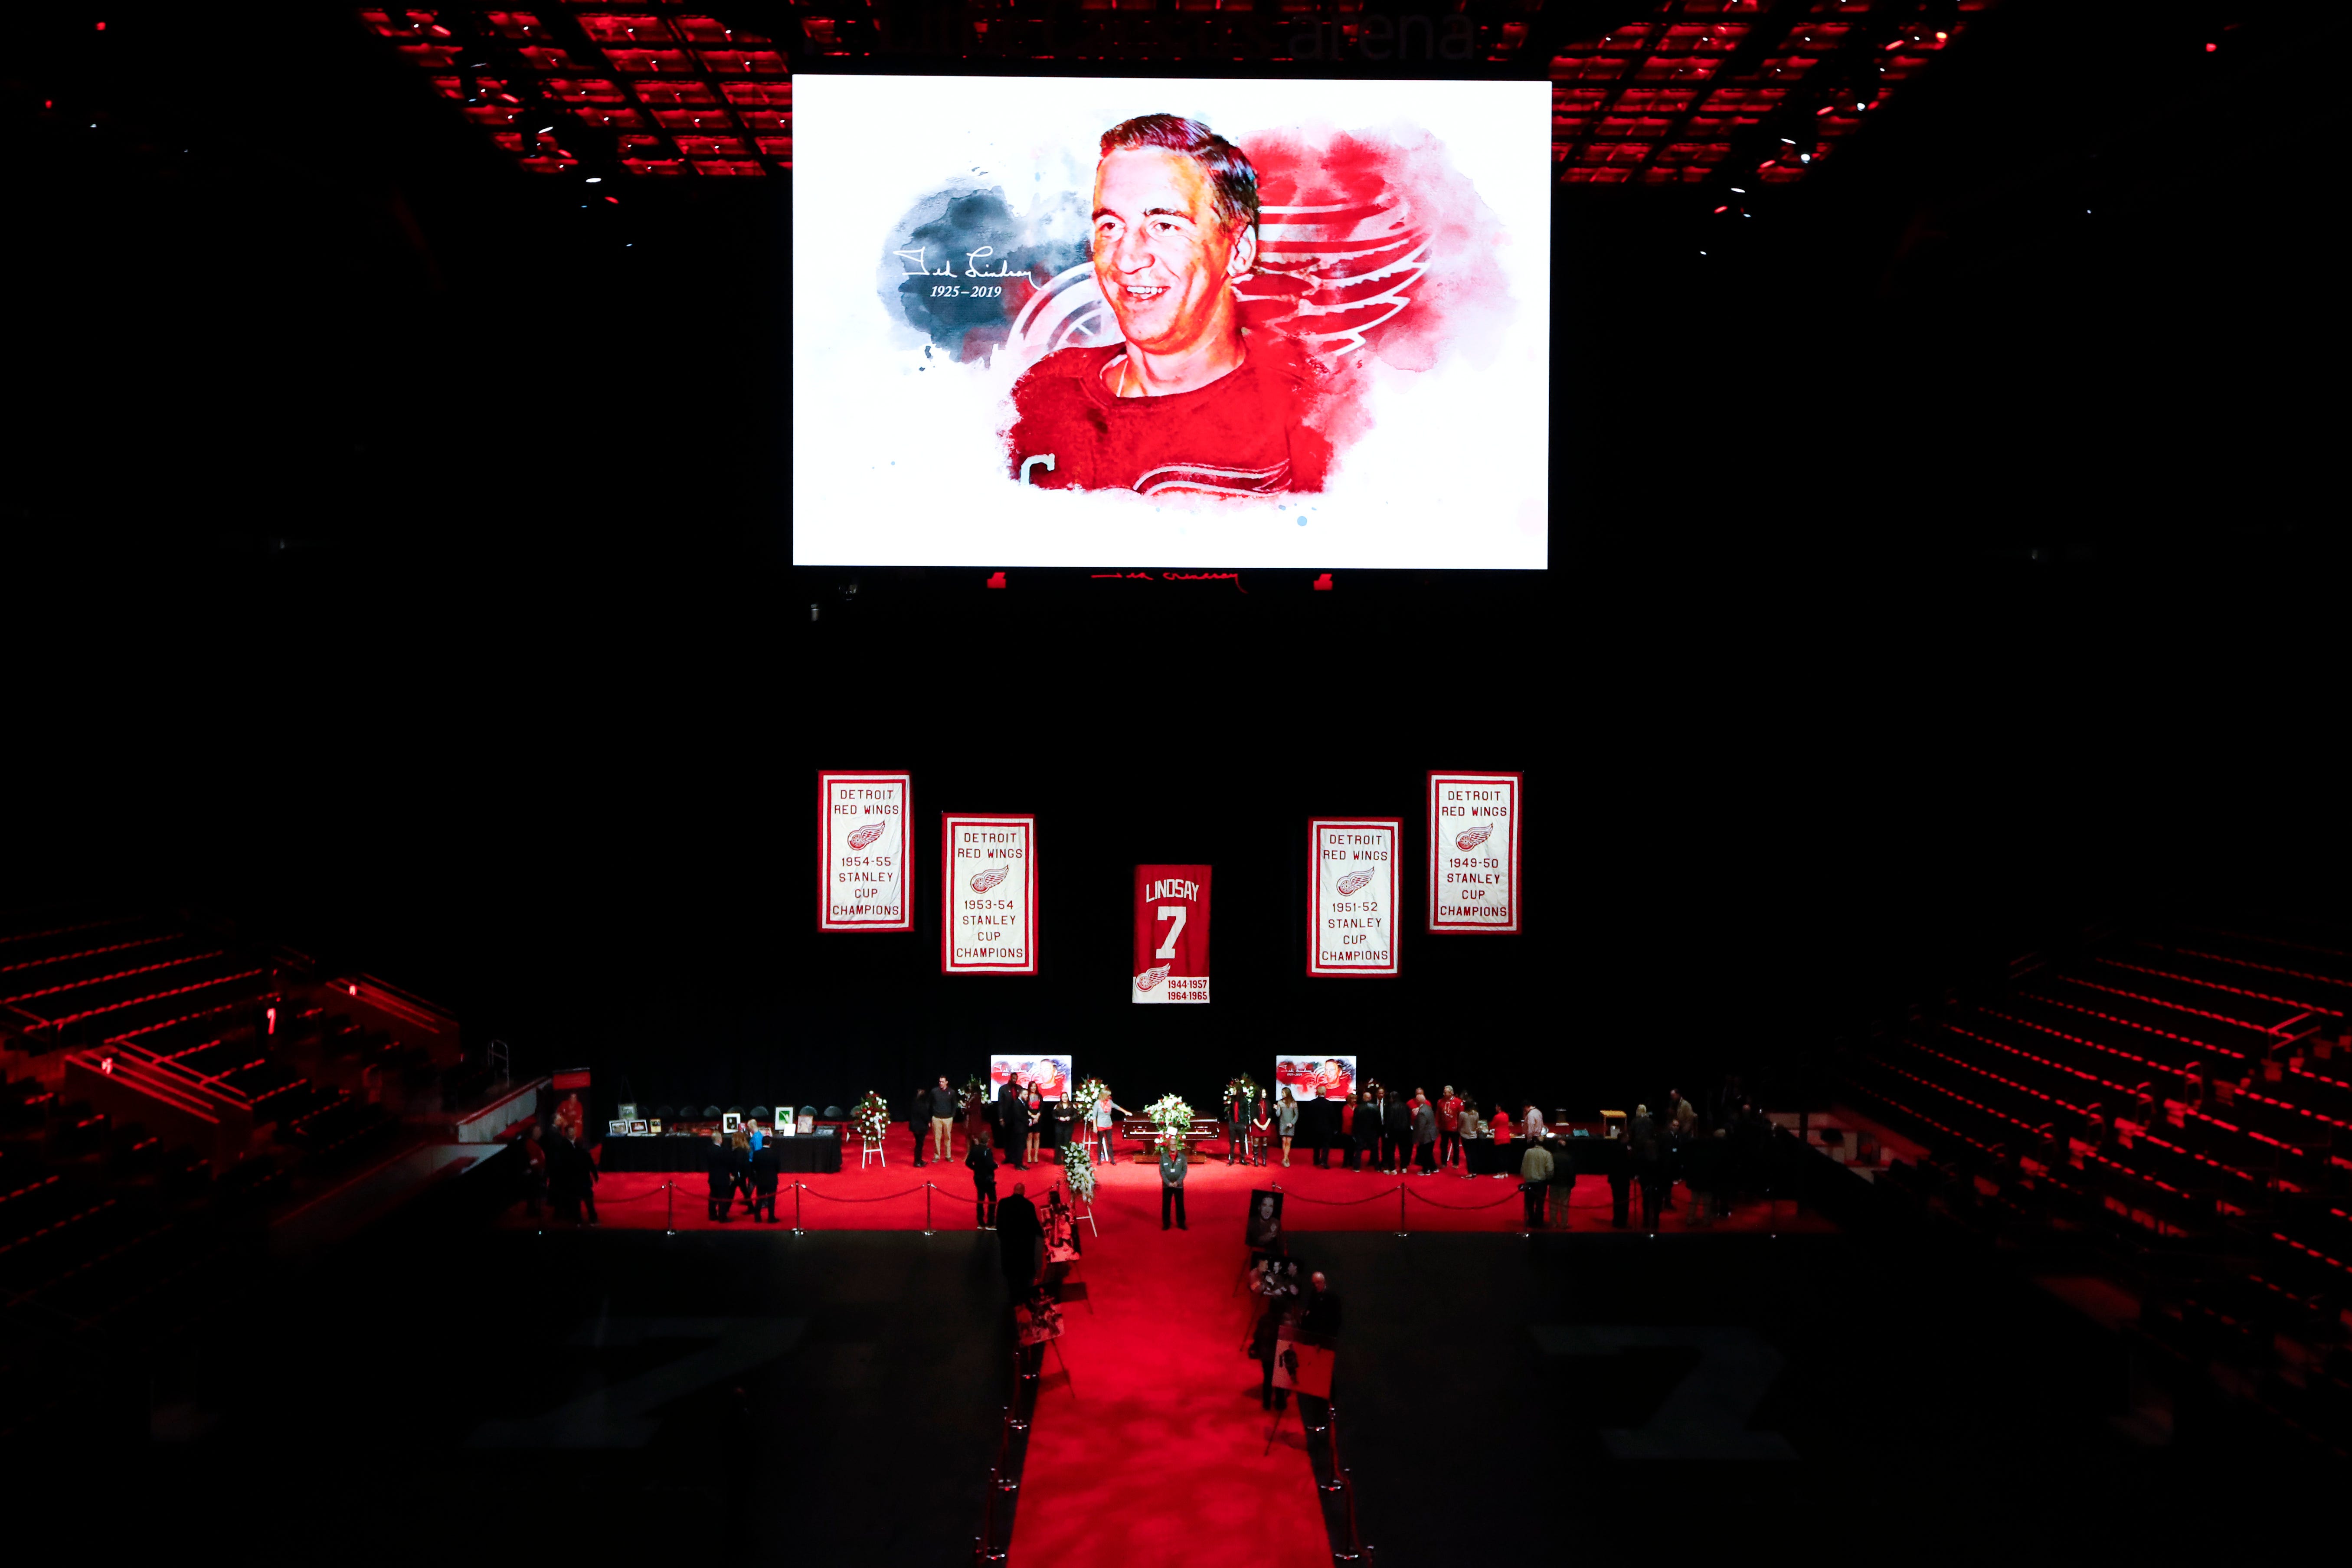 An illustration of Ted Lindsay is projected on the scoreboard as mourners view the casket in Little Caesars Arena.